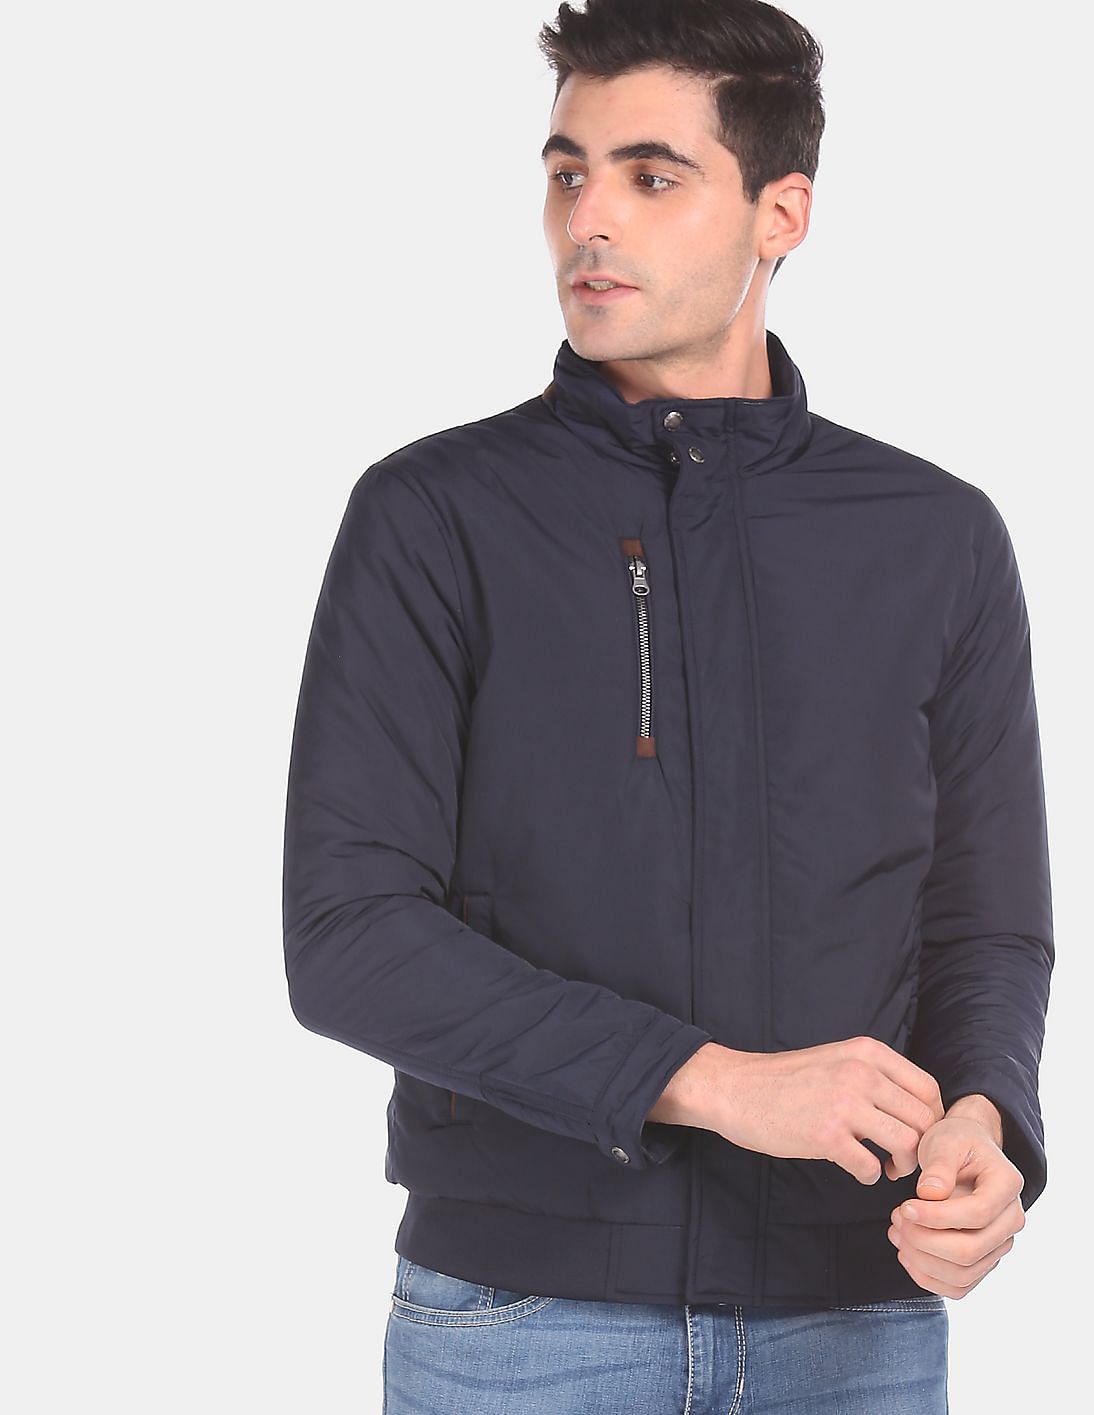 Buy U.S. Polo Assn. Stand Collar Solid Bomber Jacket - NNNOW.com